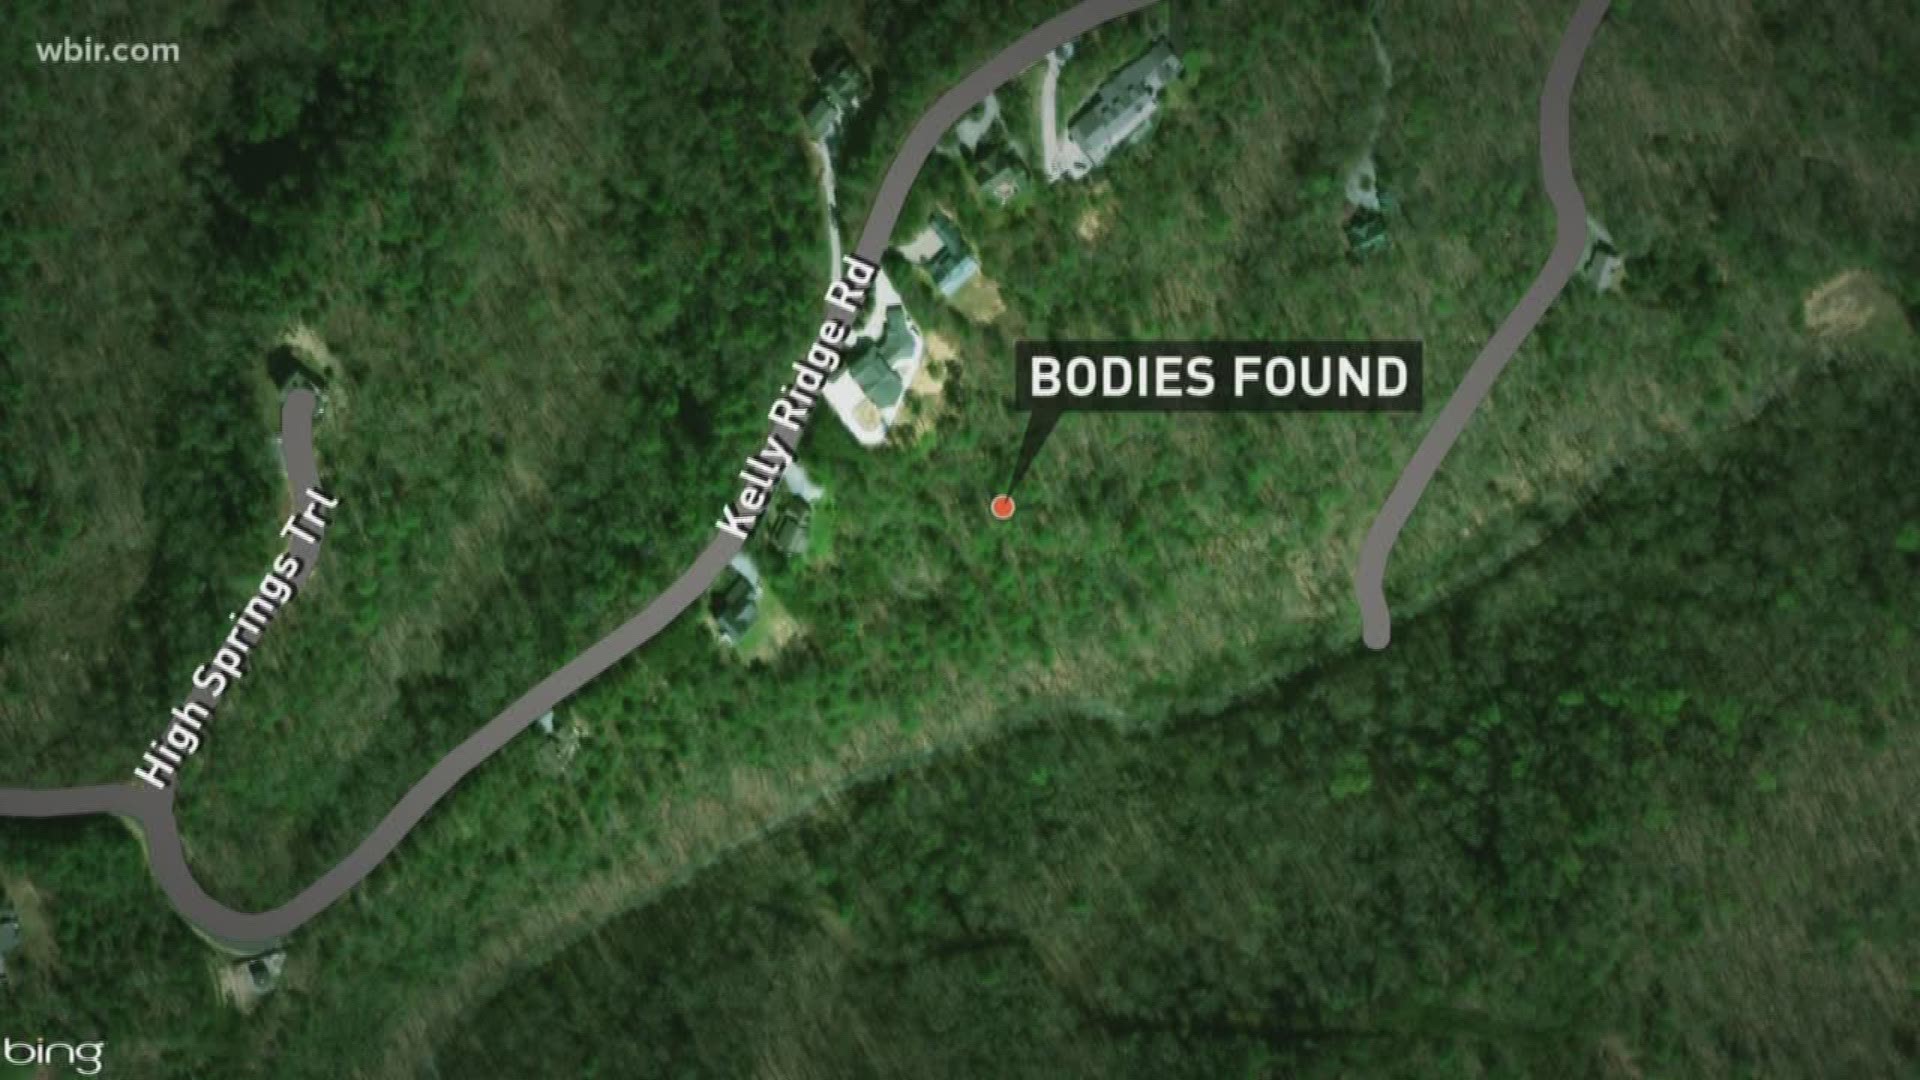 Blount County Sheriff's Office found two bodies and have identified who they are.